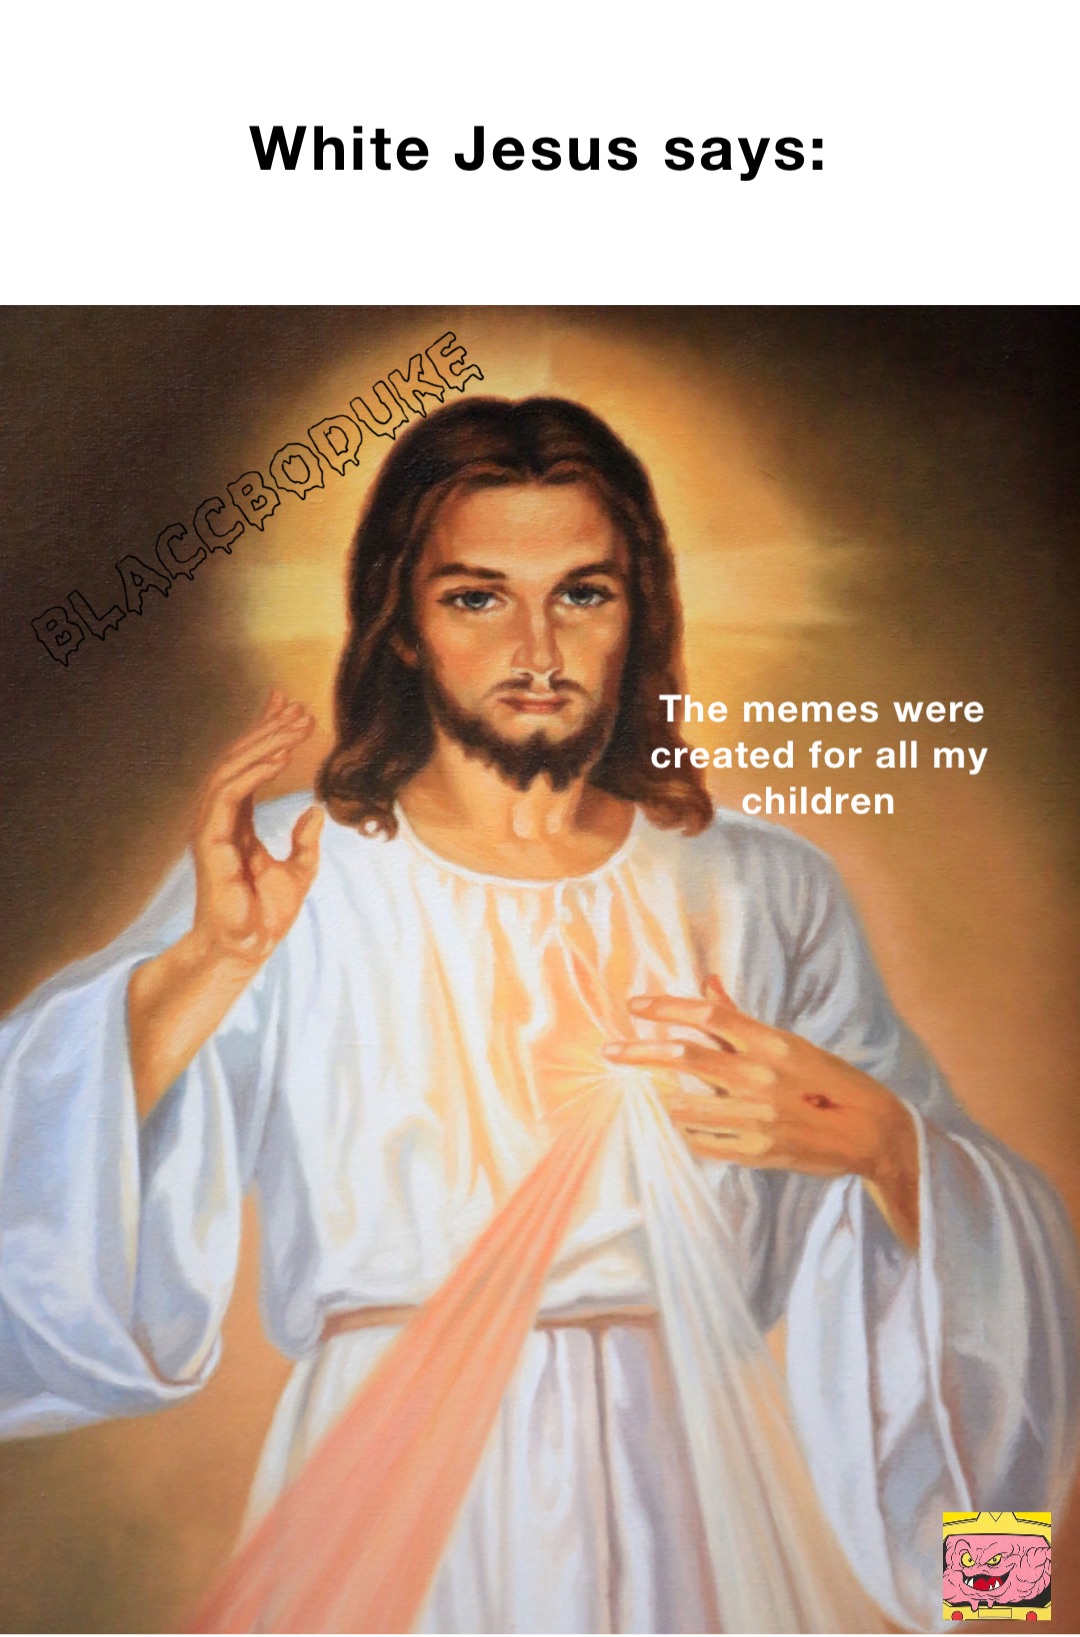 White Jesus says: The memes were created for all my children BlaccBoDuke